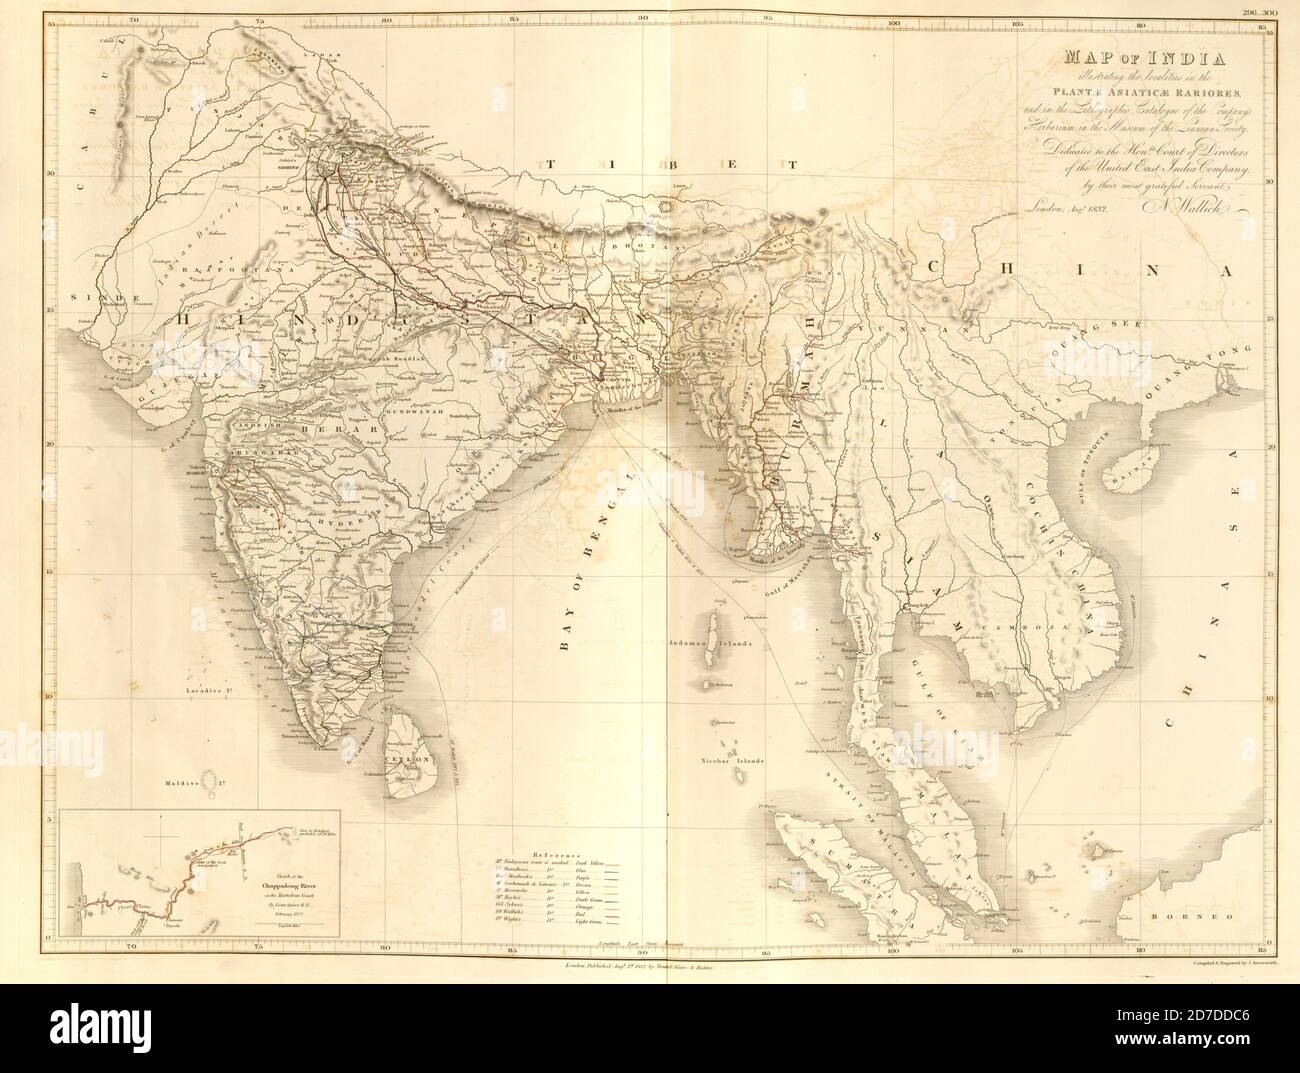 19th century map of India and Indochina From Plantae Asiaticae rariores, or, Descriptions and figures of a select number of unpublished East Indian plants Volume III by Nathaniel Wolff Wallich. Published in London in 1832 Stock Photo